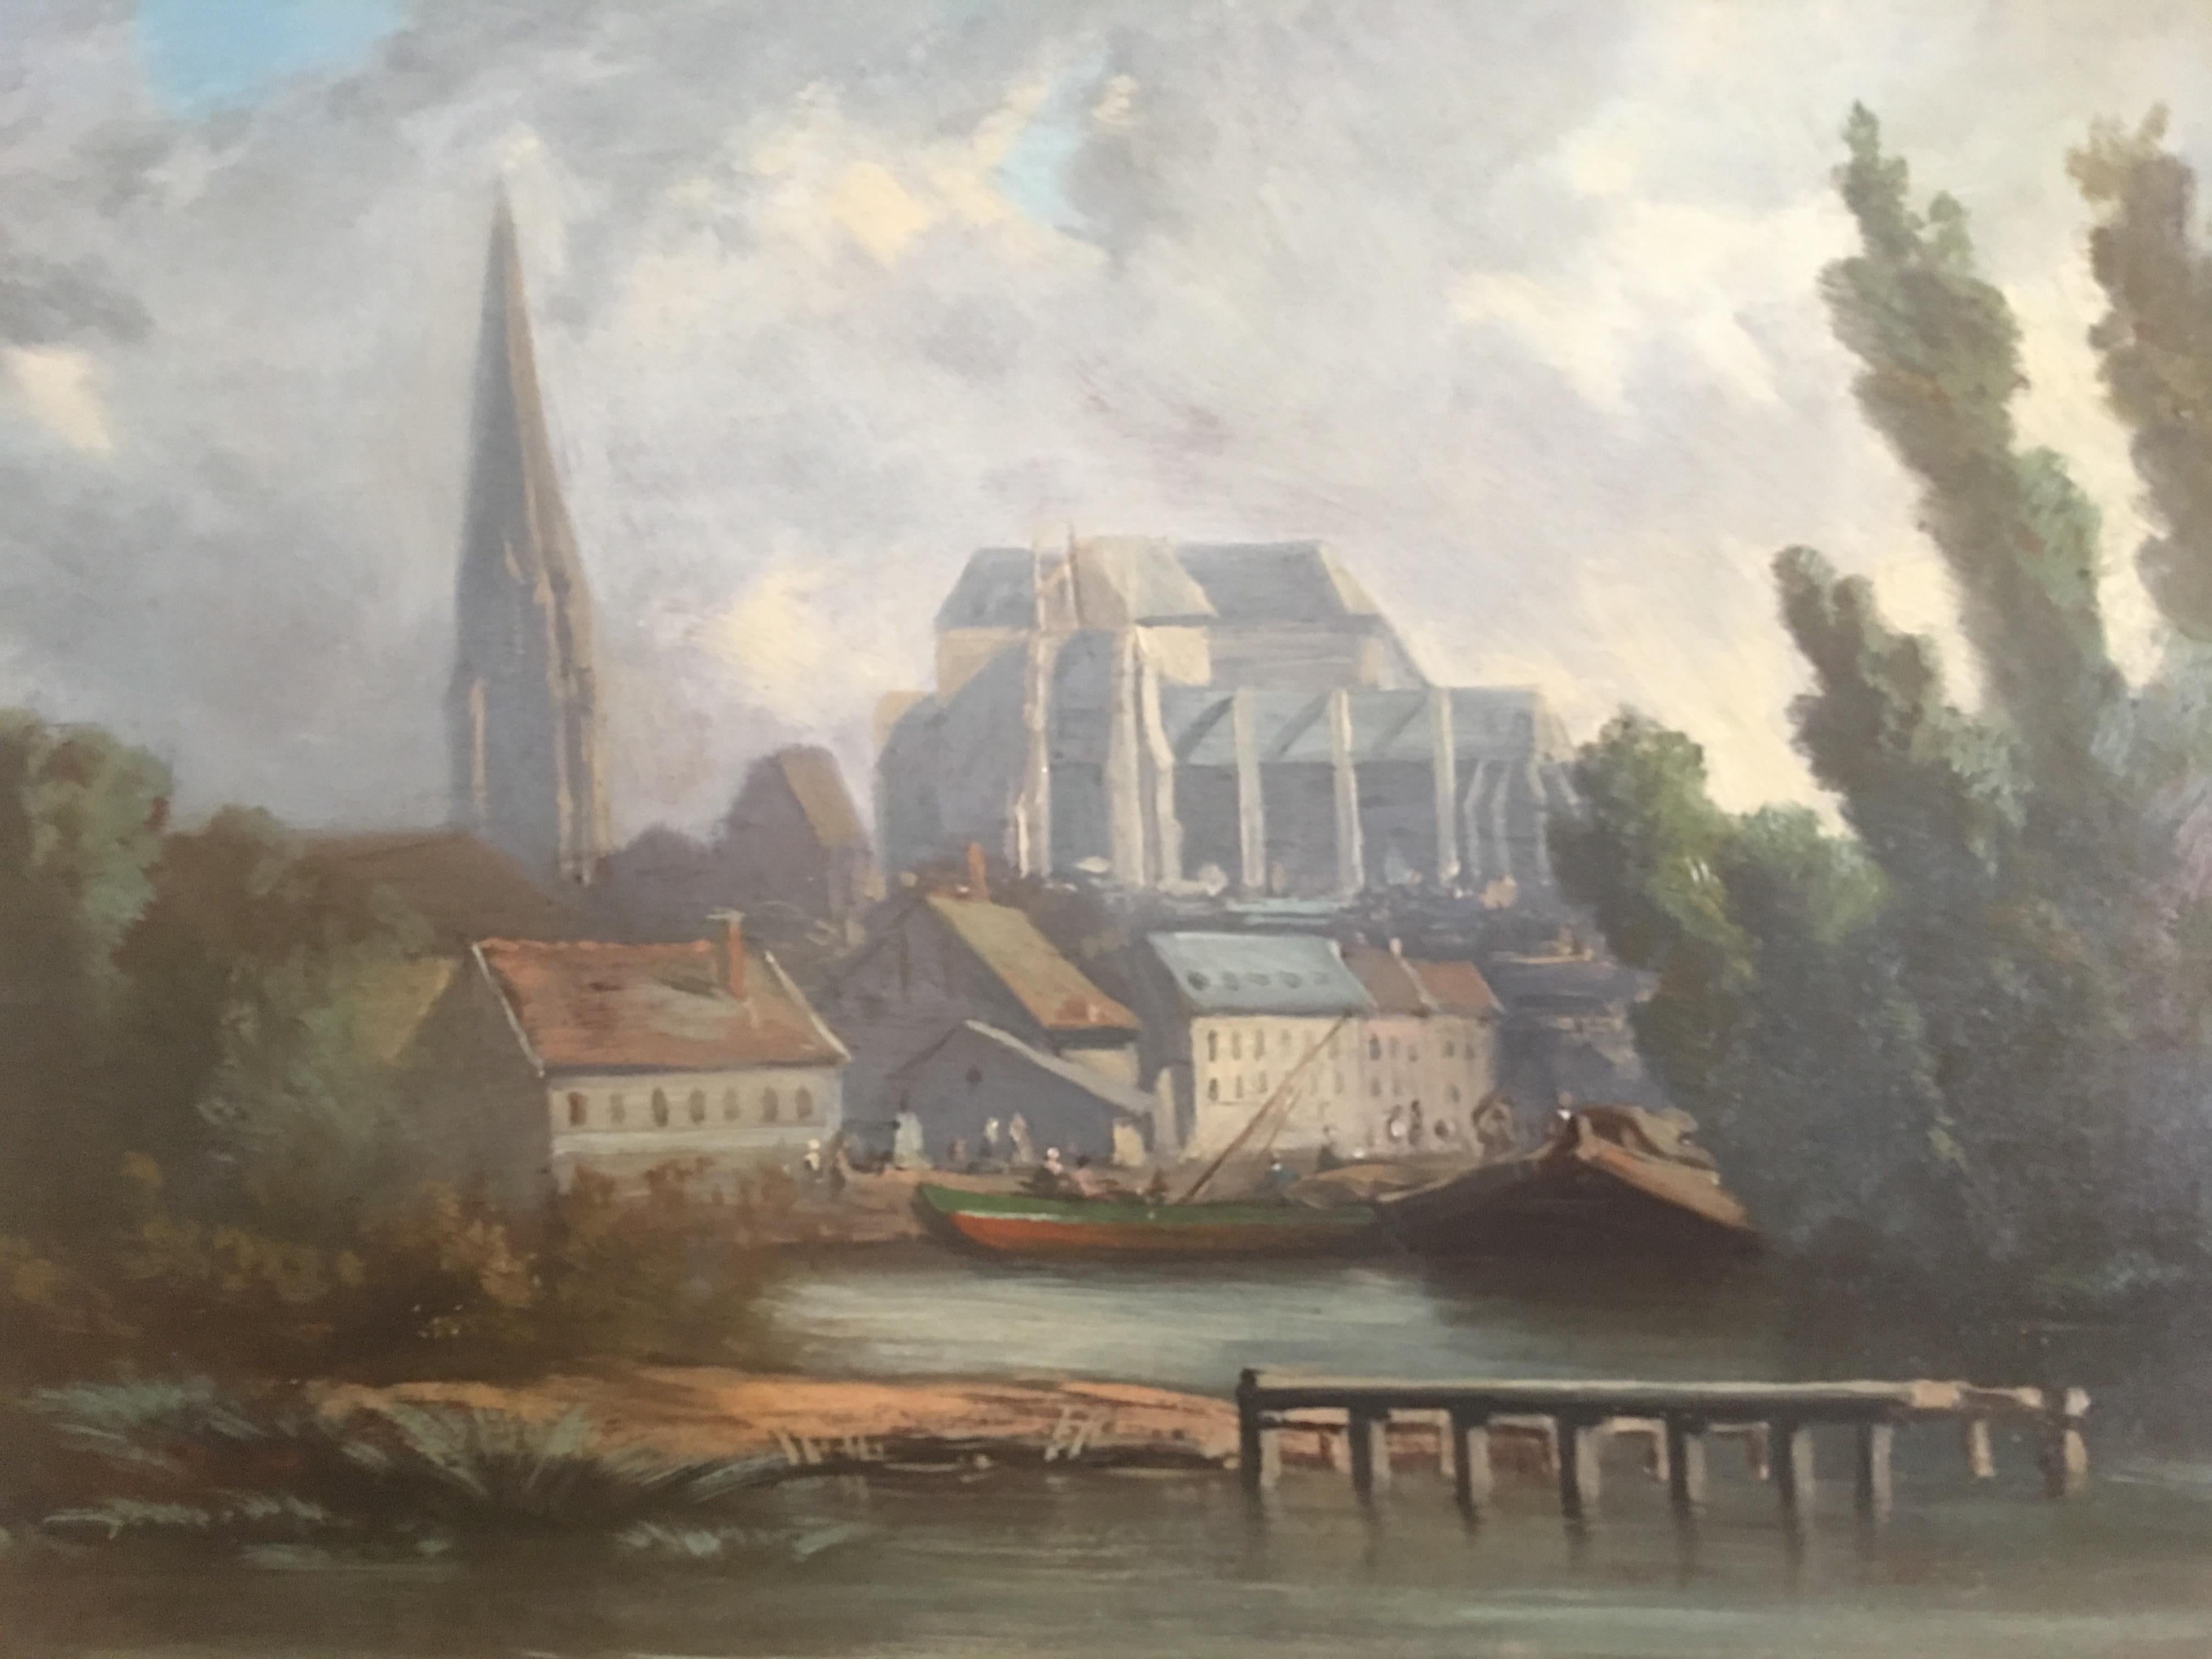 A view of a Normandy Town with Cathedral and river.

Oil on board signed bottom left J.Sorlain, circa 1900.

J. Sorlain is the pseudonym of Paul Denarié (1859-1942)

Paul Denarié, also known as Jean Sorlain, born in 1859 in Paris and died in 1942 in